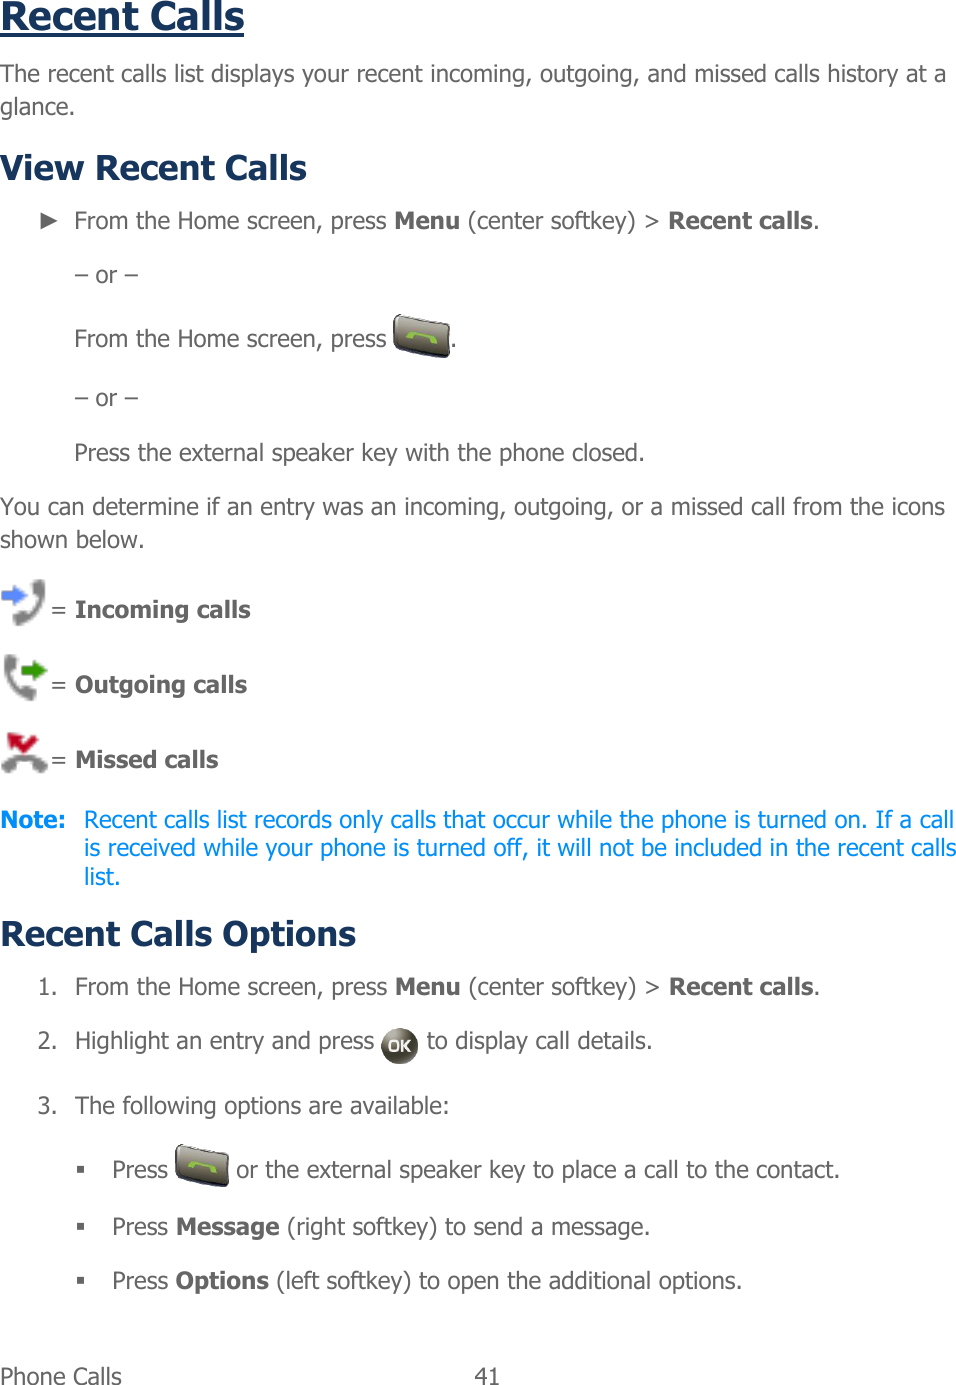  Phone Calls   41   Recent Calls The recent calls list displays your recent incoming, outgoing, and missed calls history at a glance. View Recent Calls  ► From the Home screen, press Menu (center softkey) &gt; Recent calls. – or – From the Home screen, press  . – or – Press the external speaker key with the phone closed. You can determine if an entry was an incoming, outgoing, or a missed call from the icons shown below. = Incoming calls = Outgoing calls = Missed calls Note:  Recent calls list records only calls that occur while the phone is turned on. If a call is received while your phone is turned off, it will not be included in the recent calls list. Recent Calls Options 1. From the Home screen, press Menu (center softkey) &gt; Recent calls. 2. Highlight an entry and press   to display call details. 3. The following options are available:  Press   or the external speaker key to place a call to the contact.  Press Message (right softkey) to send a message.  Press Options (left softkey) to open the additional options. 